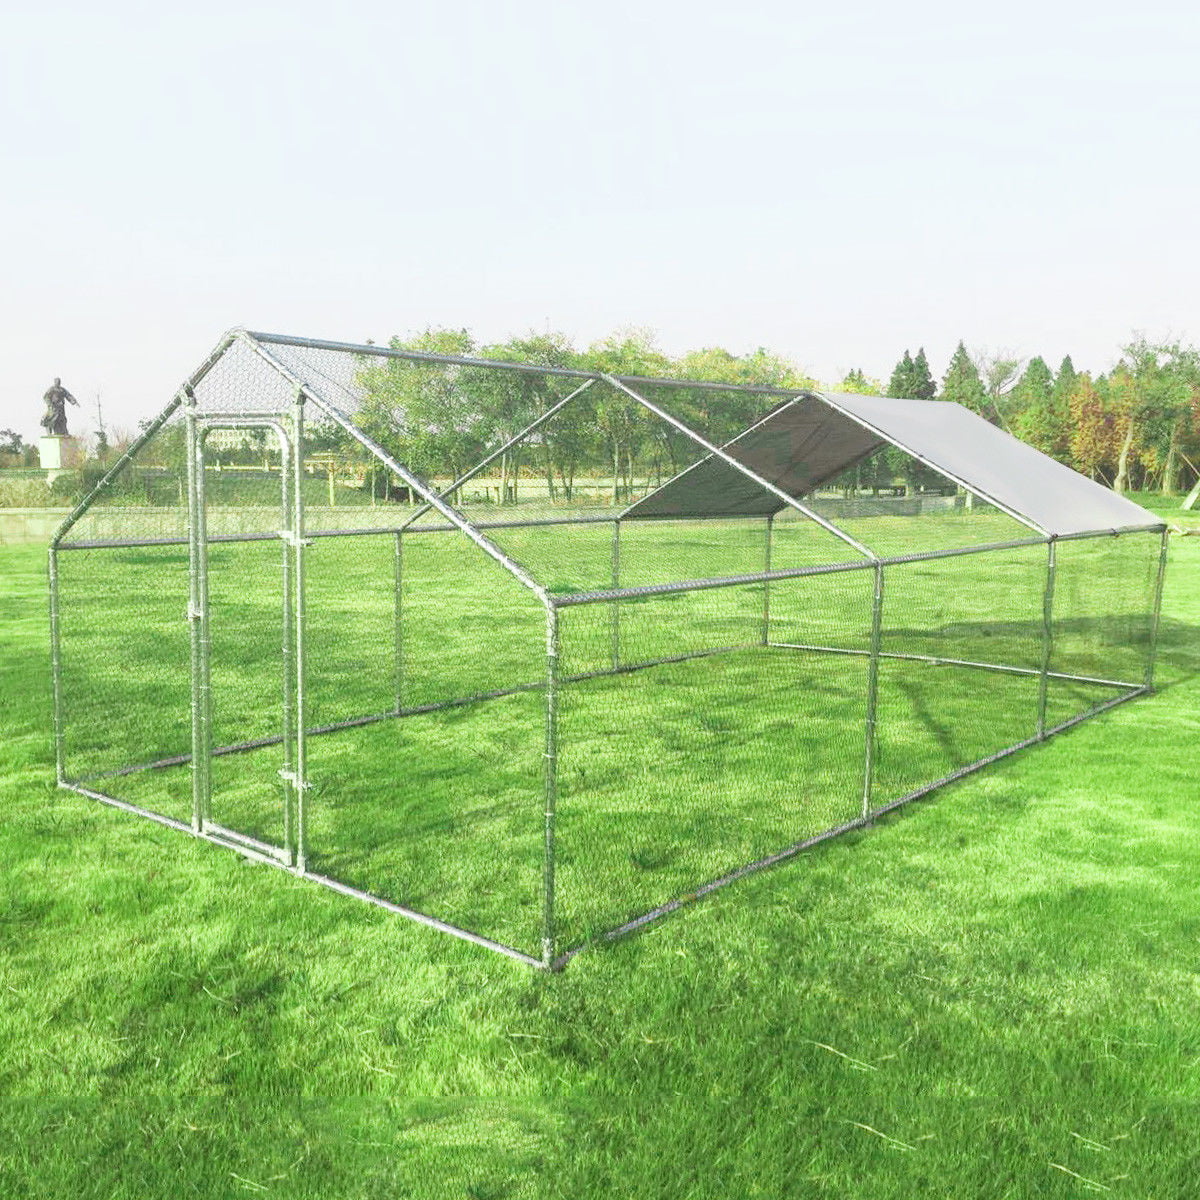 Gymax Large Walk In Chicken Coop Run House Shade Cage 10&amp;#39;x20&amp;#39; with Roof Cover Backyard